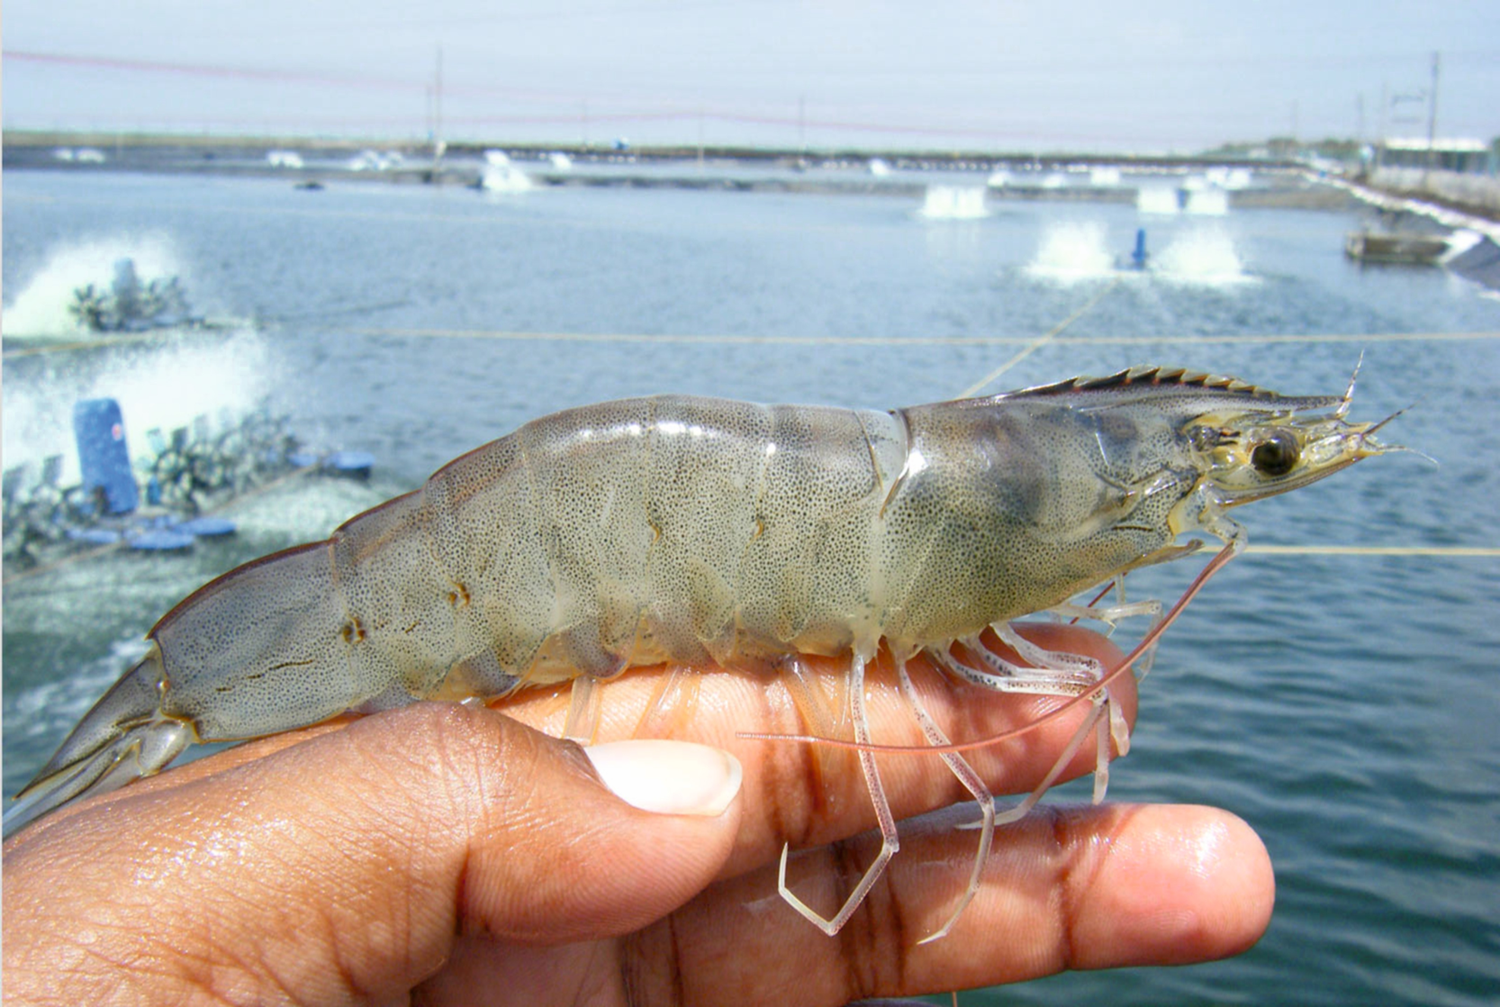 Shrimp on a hand in front of a shrimp farm